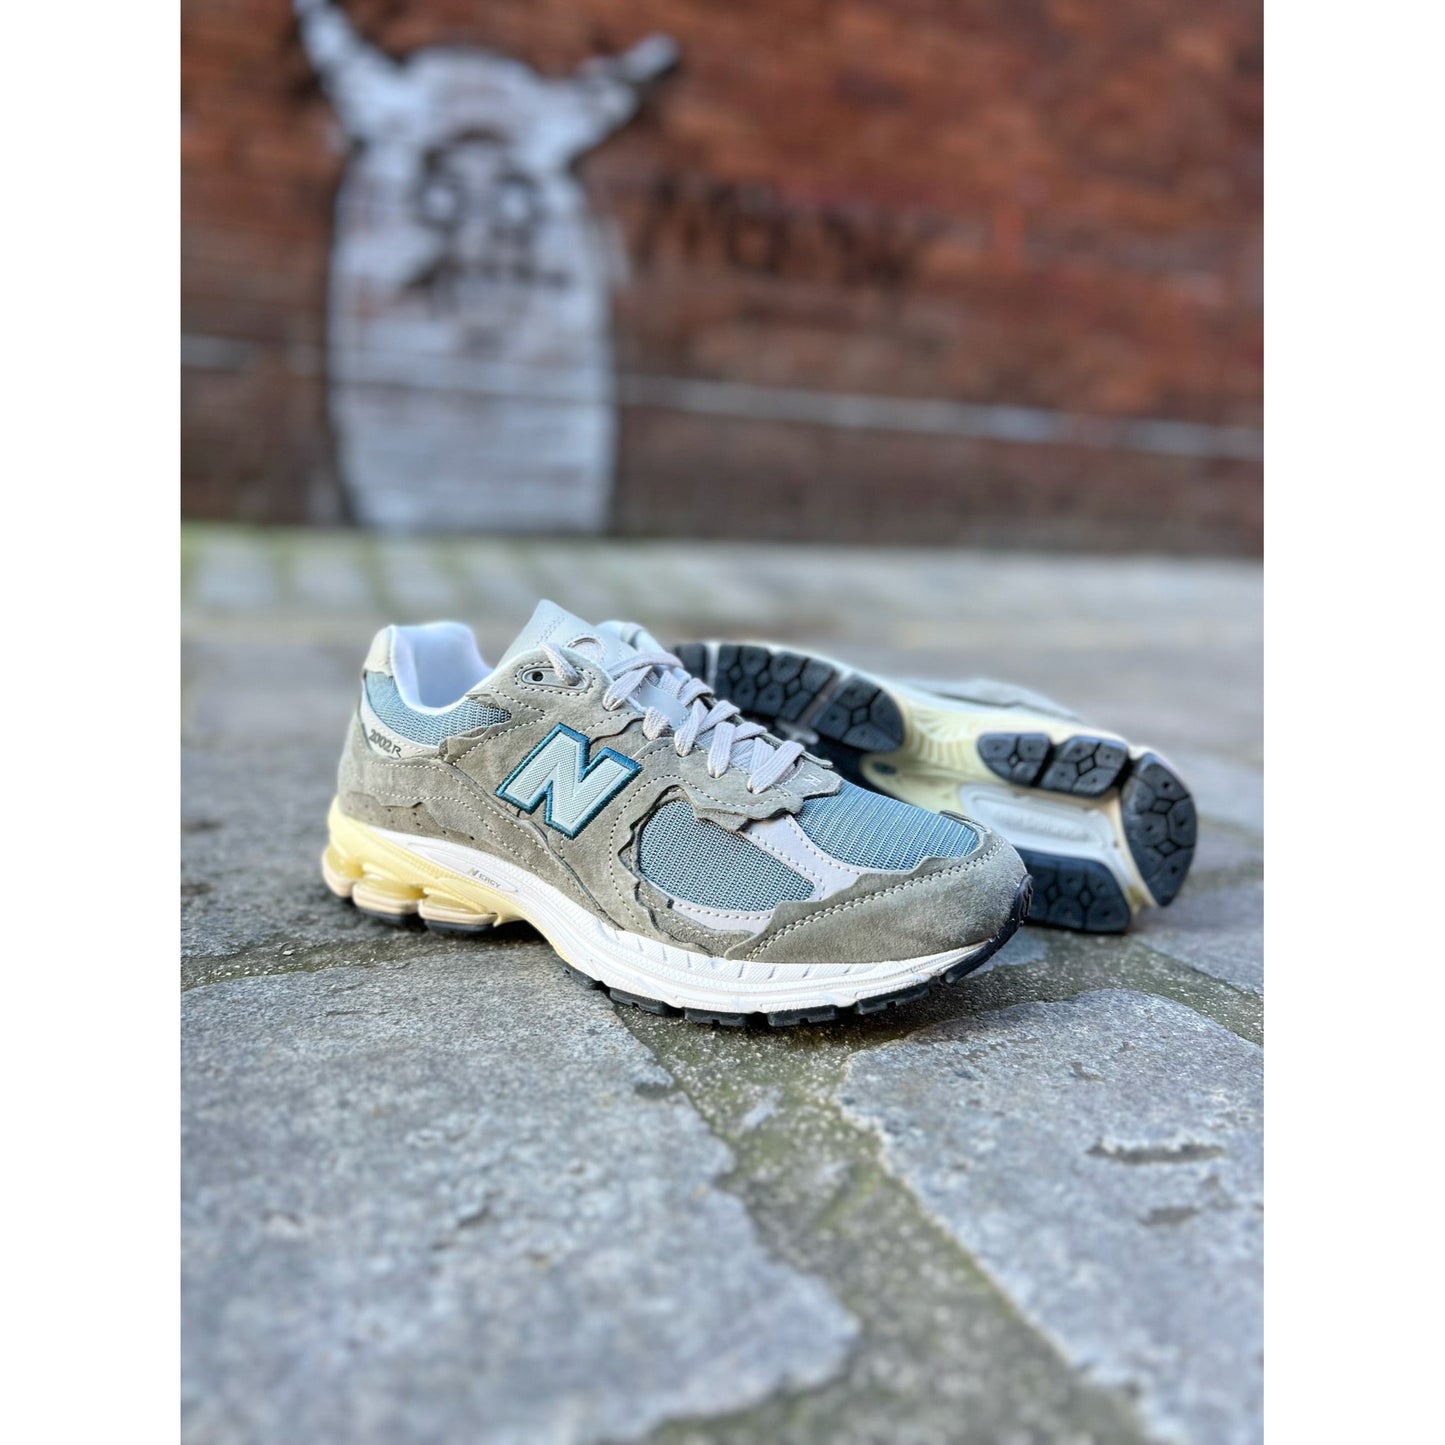 New Balance 2002R Protection Pack Mirage Grey by New Balance from £185.00